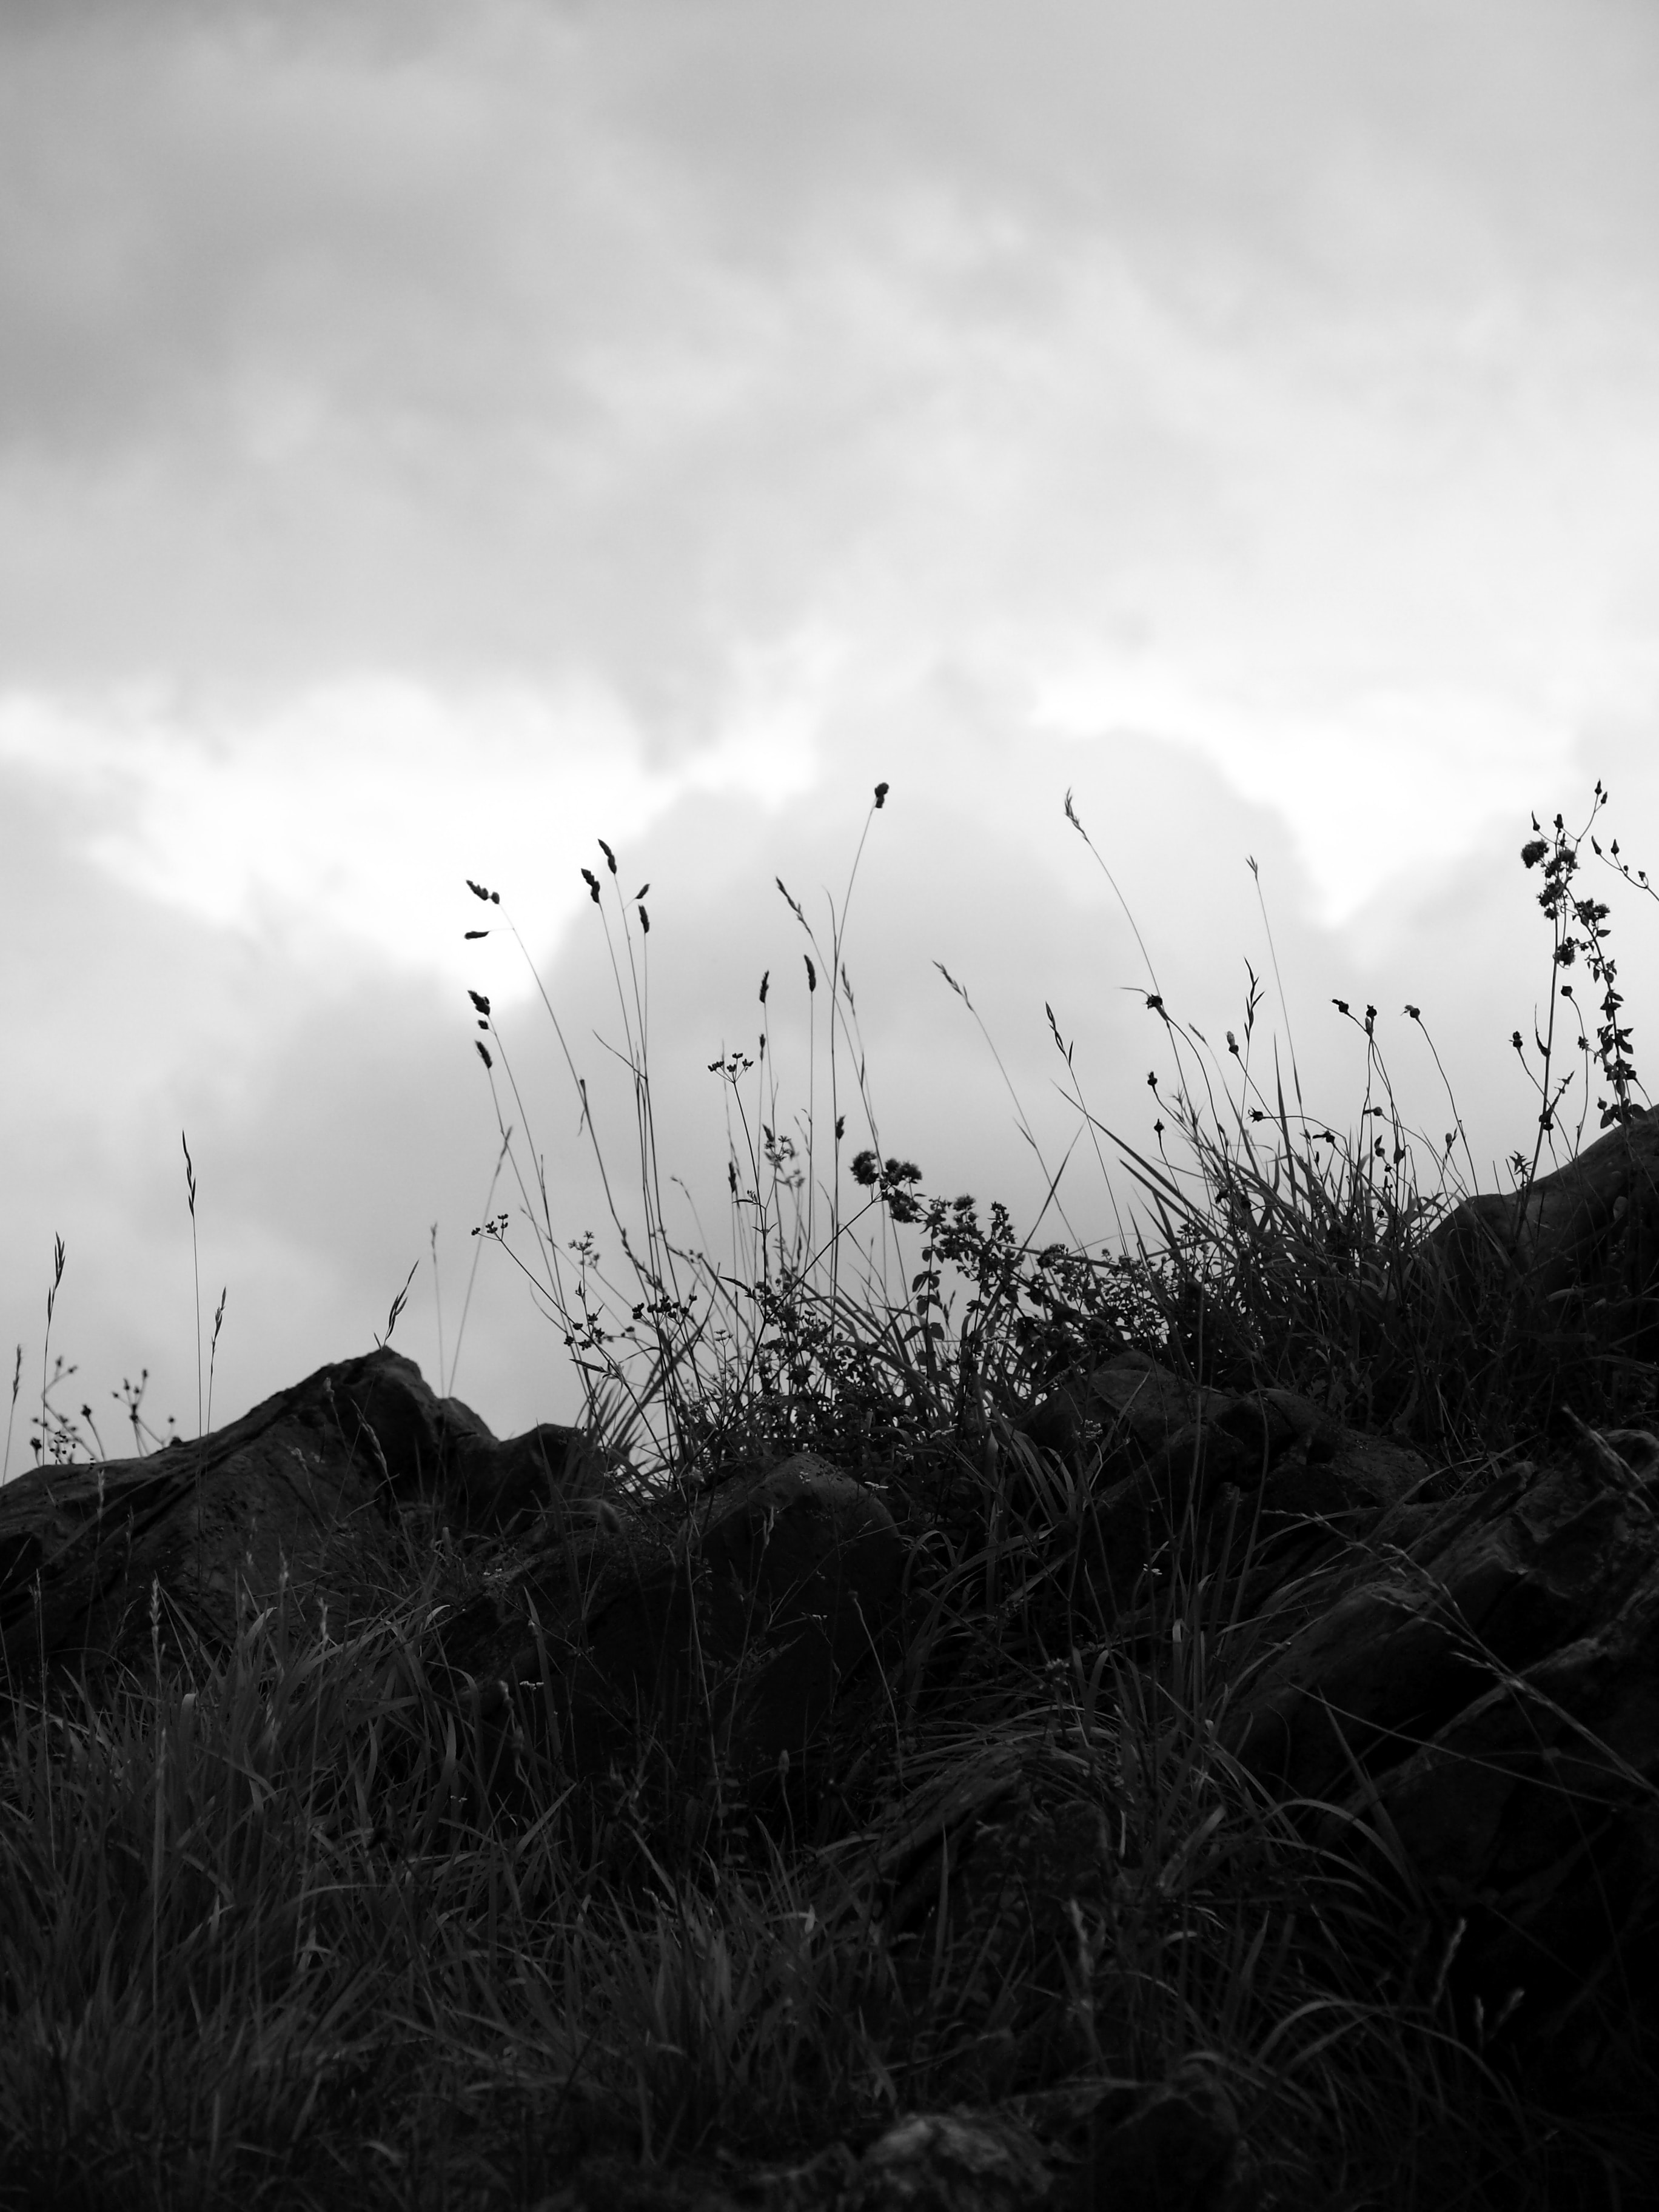 clouds, chb, nature, grass, stones, sky, bw, hill 2160p